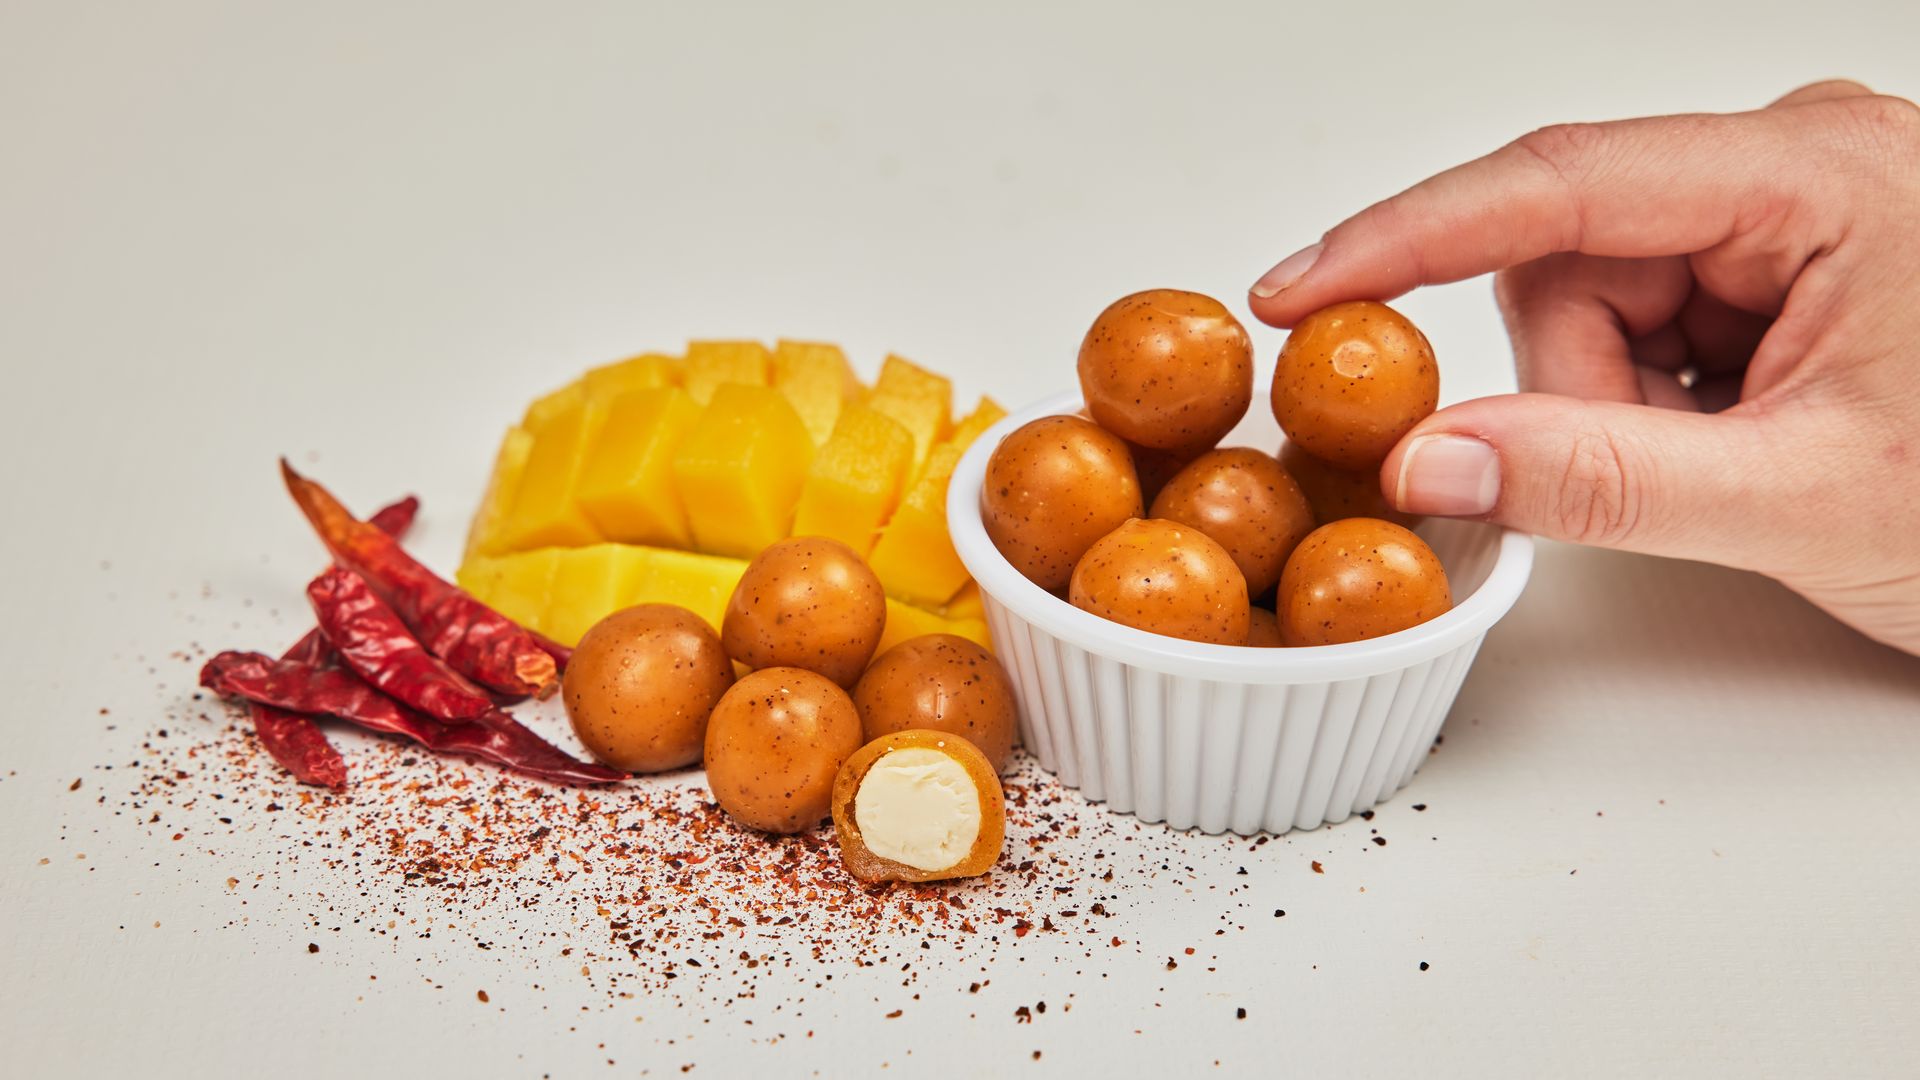 Bite-sized balls of cheese are wrapped in edible packaging.